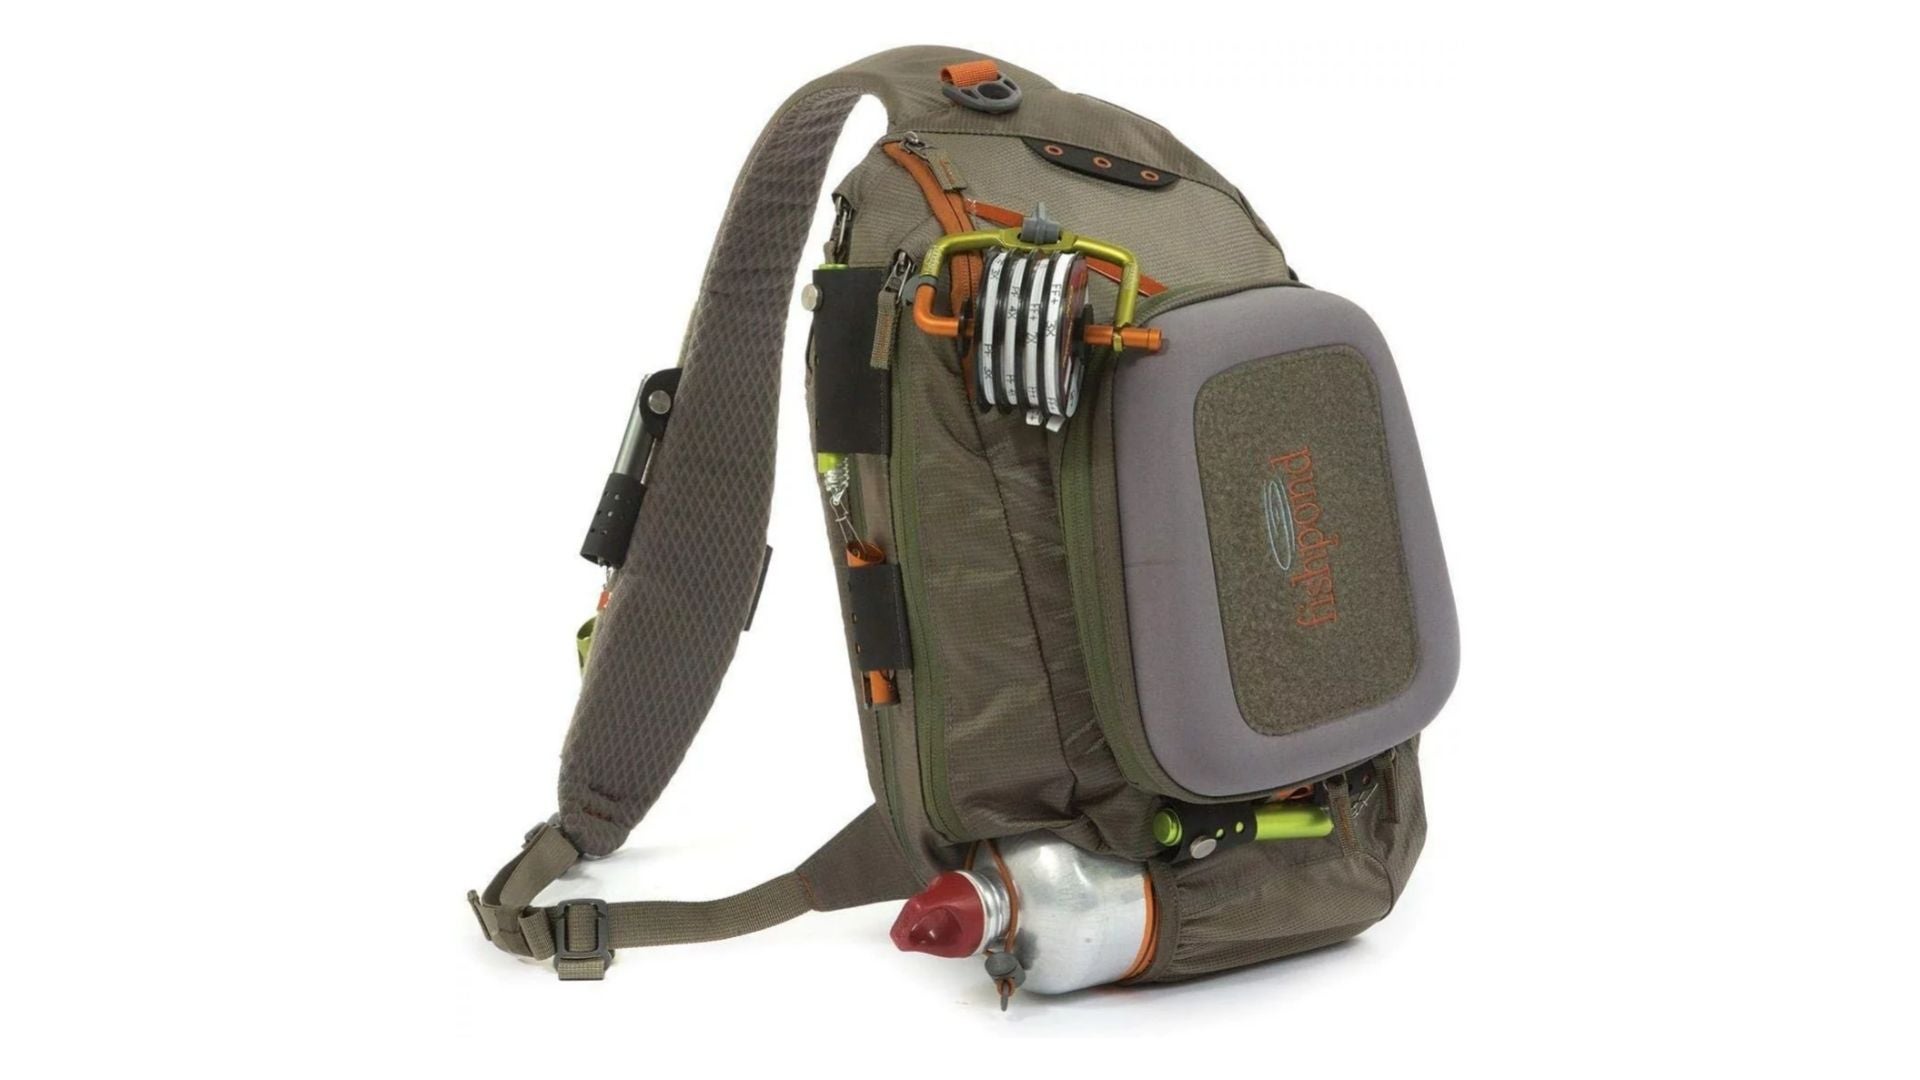 Fishpond Summit Sling Fly Fishing Backpack